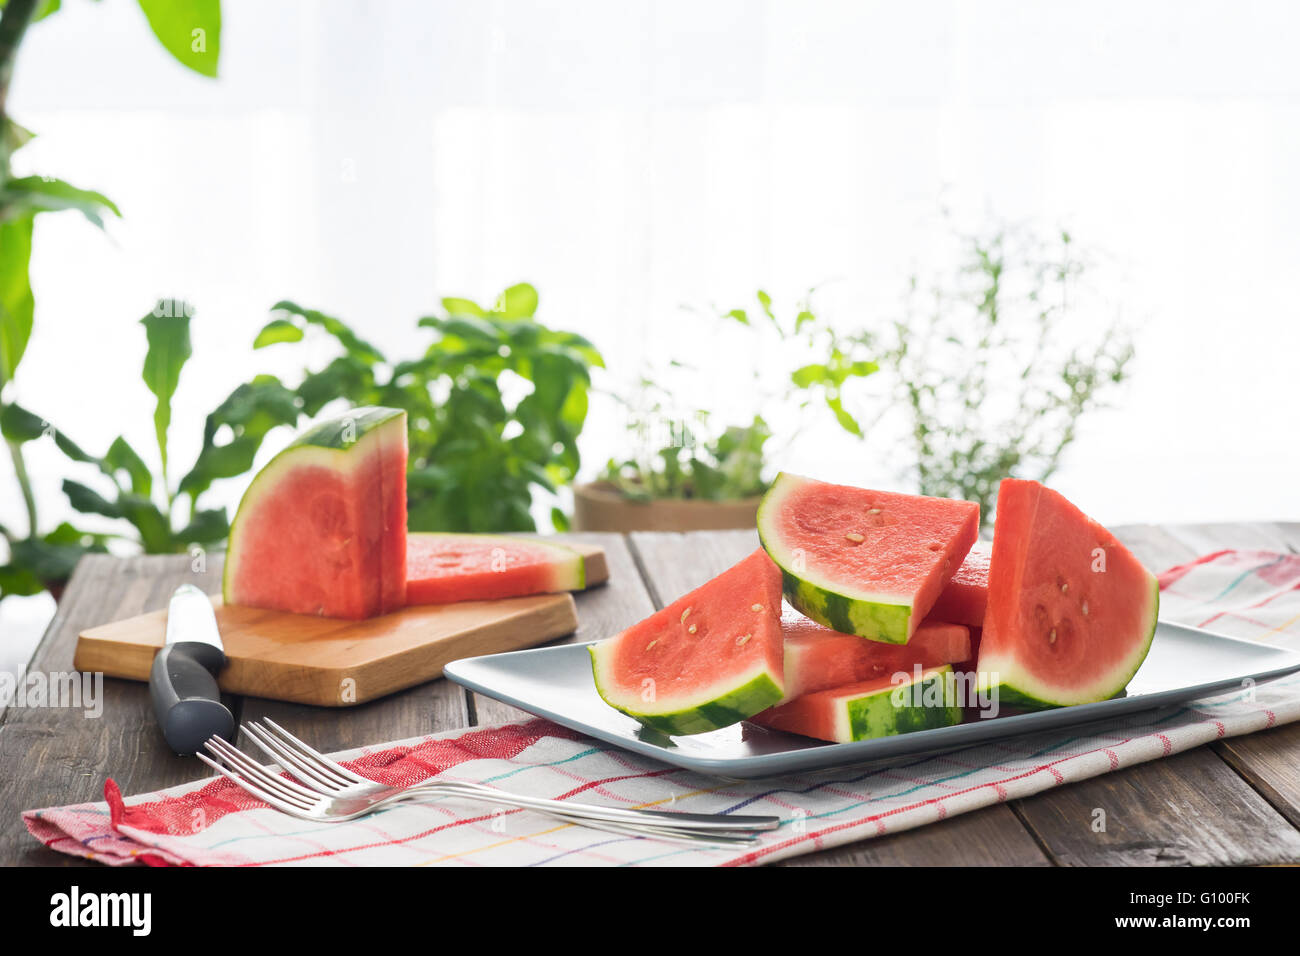 Slices of watermelon on wooden table in rustic style Stock Photo